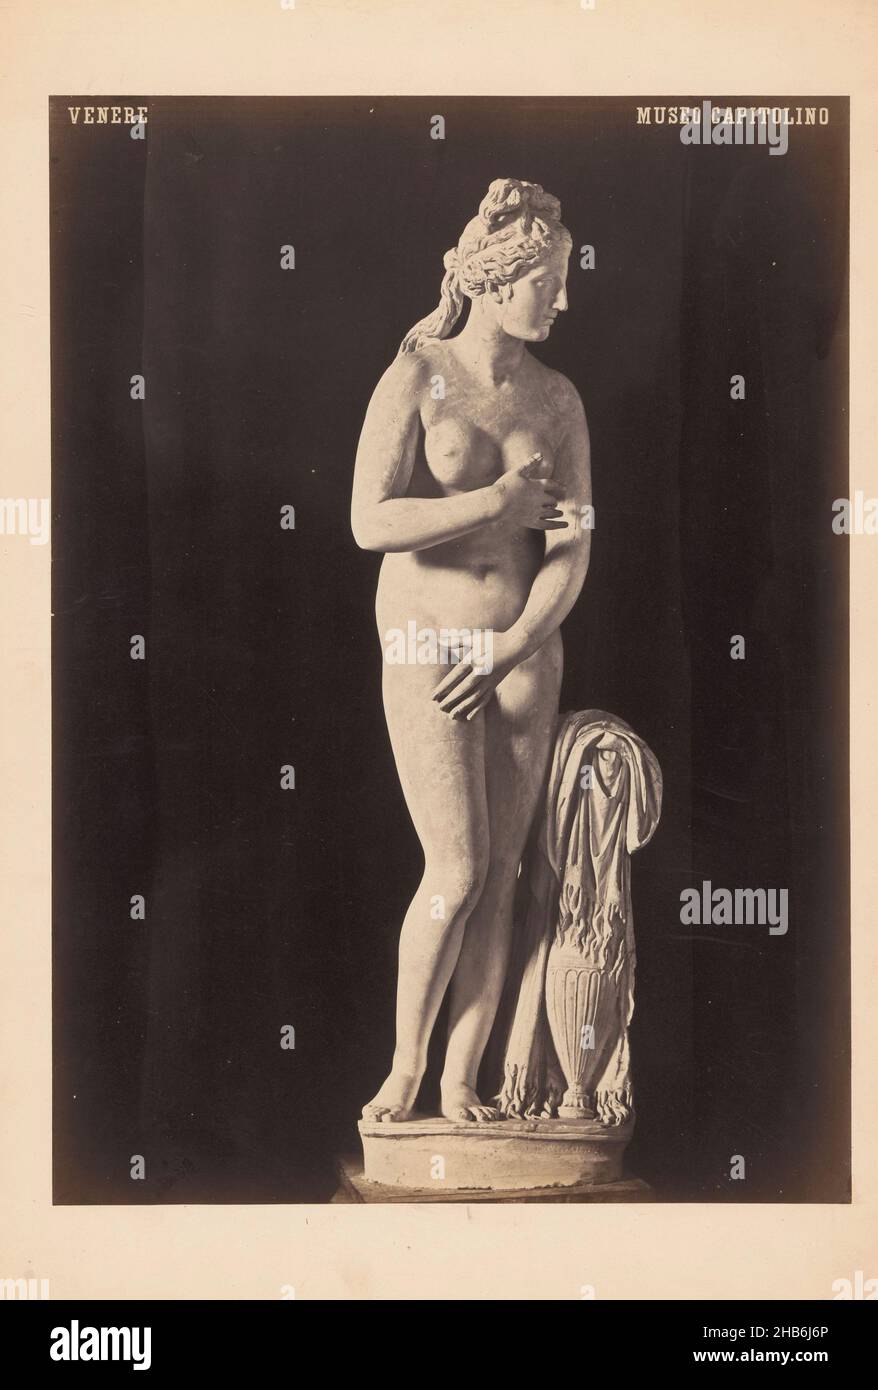 Capitoline Venus in the Capitoline Museums in Rome, VENERE MUSEO CAPITOLINI (title on object), anonymous, Capitolijnse Musea, c. 1875 - c. 1900, cardboard, albumen print, height 374 mm × width 268 mm Stock Photo